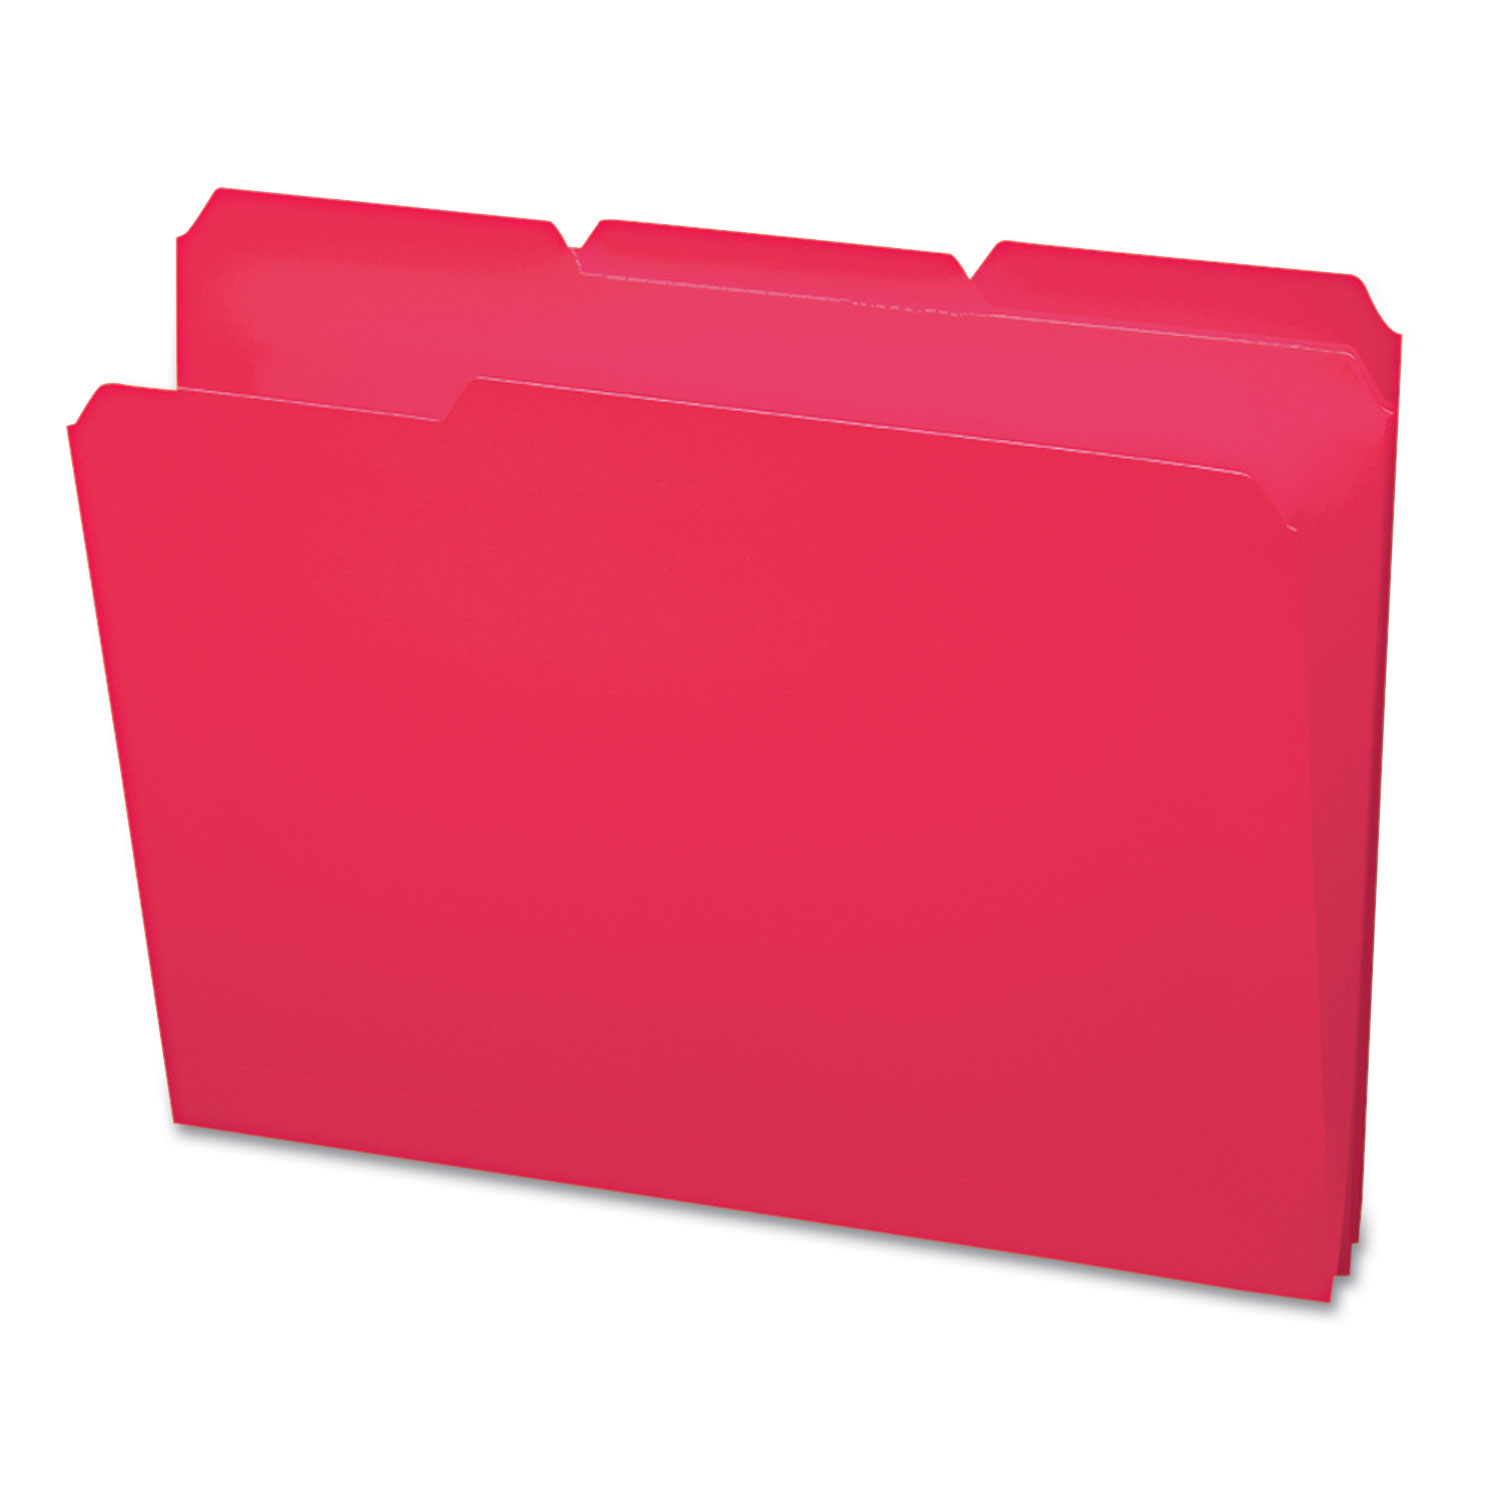  Smead 10501 Top Tab Poly Colored File Folders, 1/3-Cut Tabs, Letter Size, Red, 24/Box (SMD10501) 